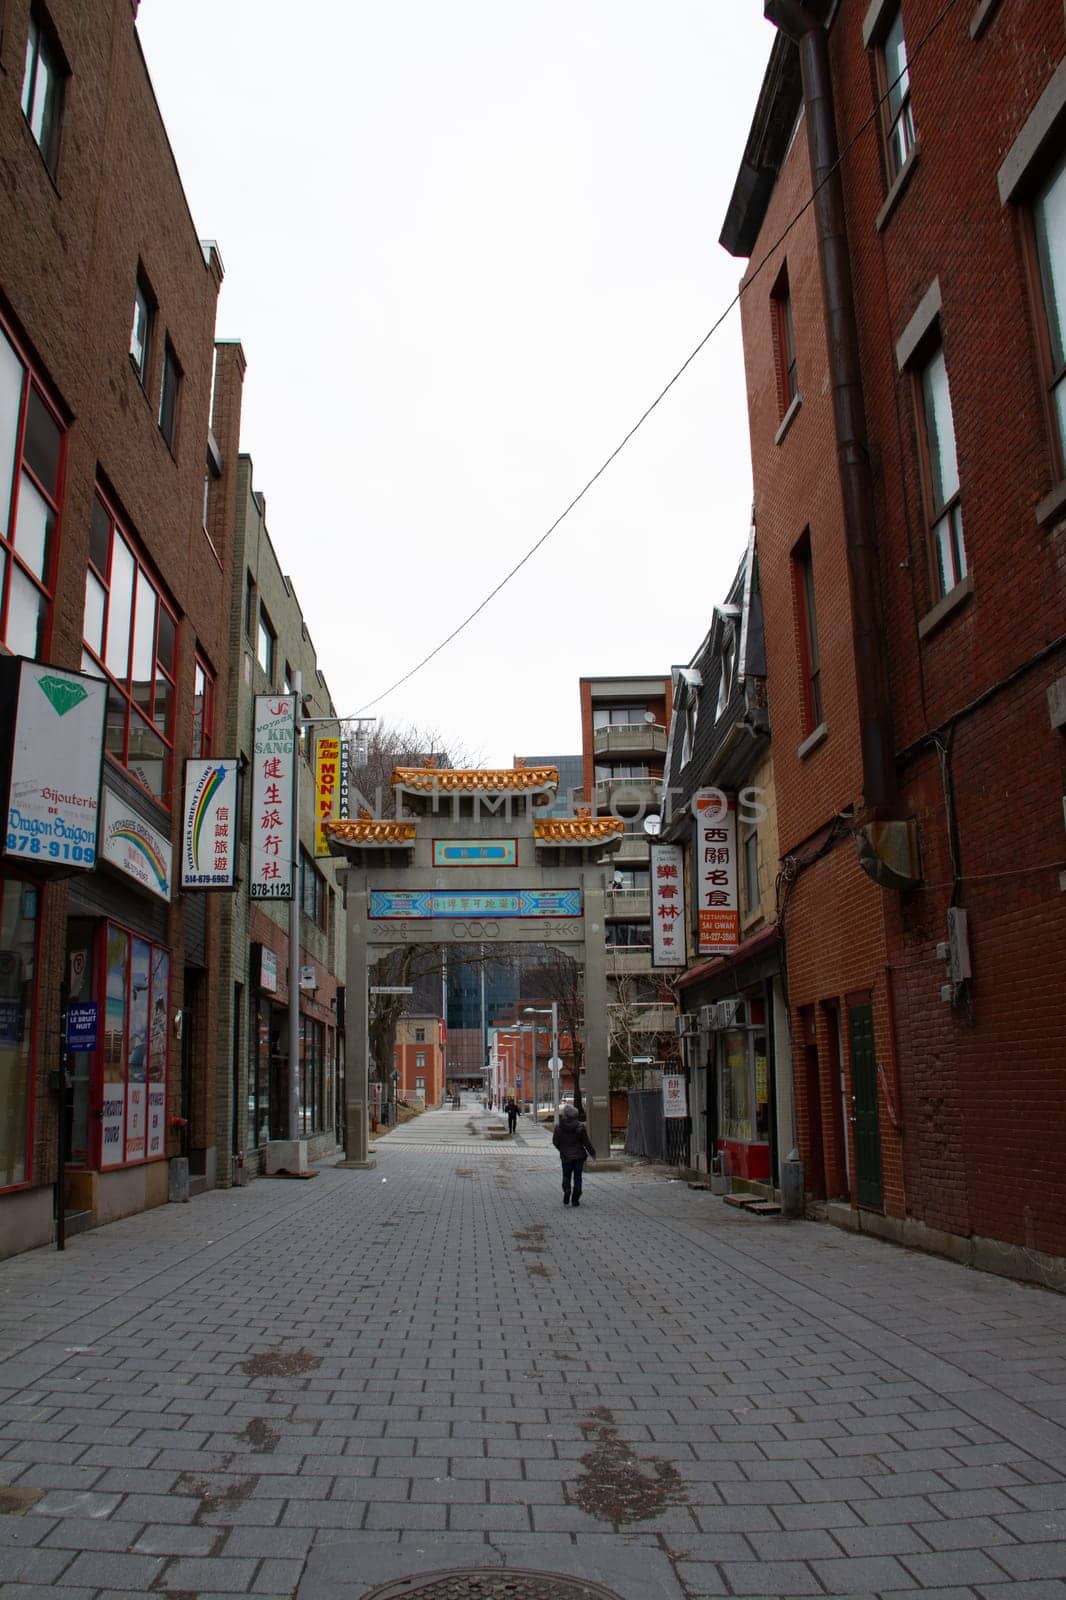 One of many streets in Chinatown near Saint Laurent in Old Montreal by Granchinho